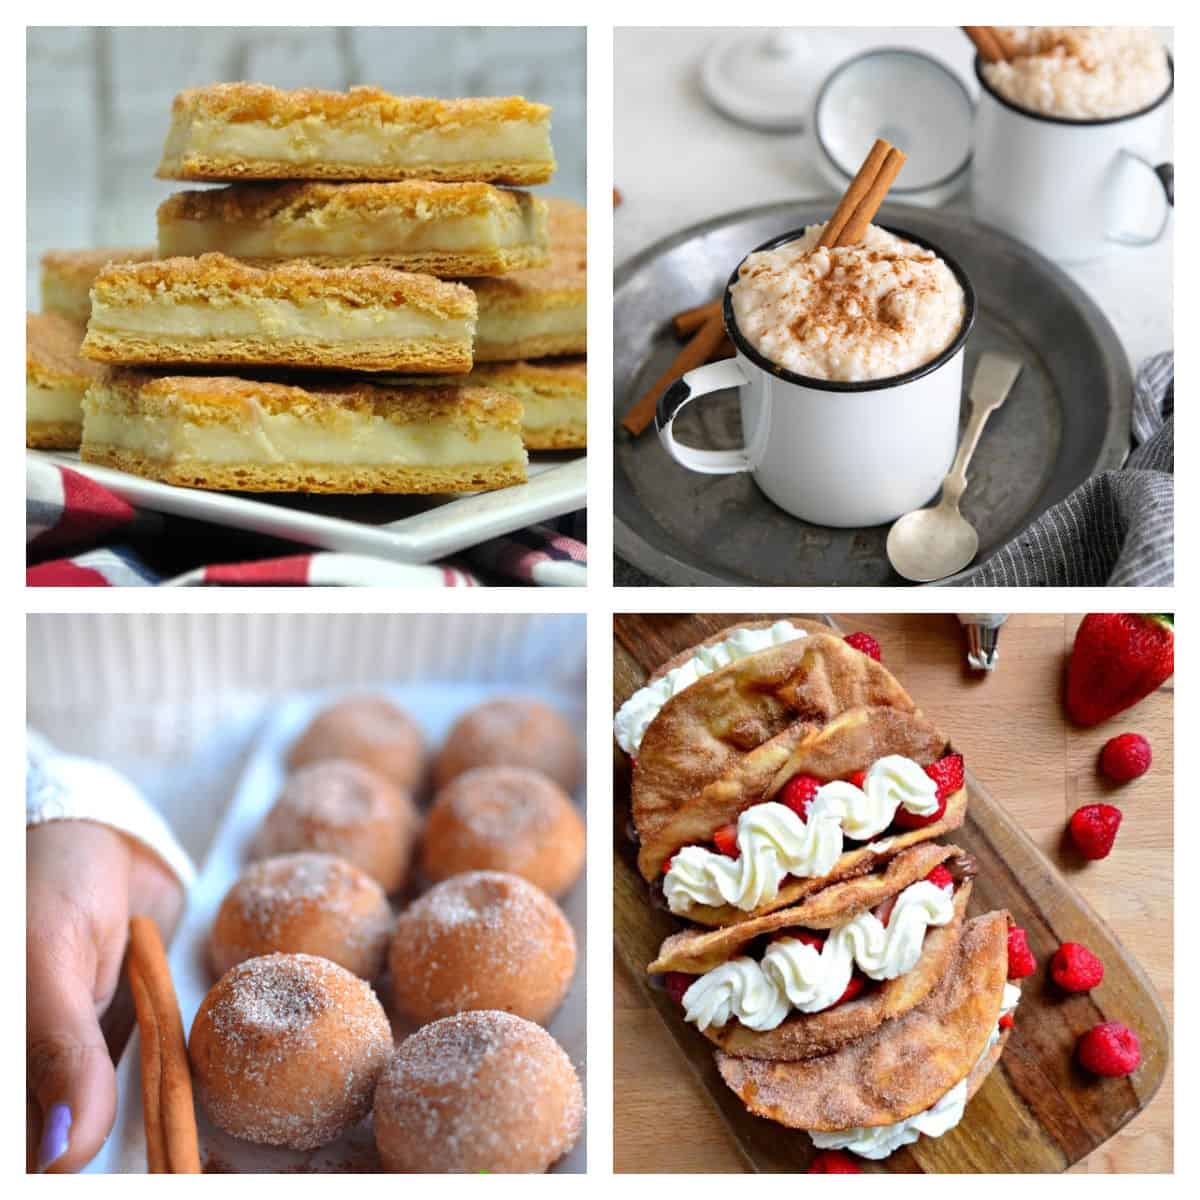 Churro cheesecake bars, rice pudding, churro muffins, and dessert tacos in a collage.